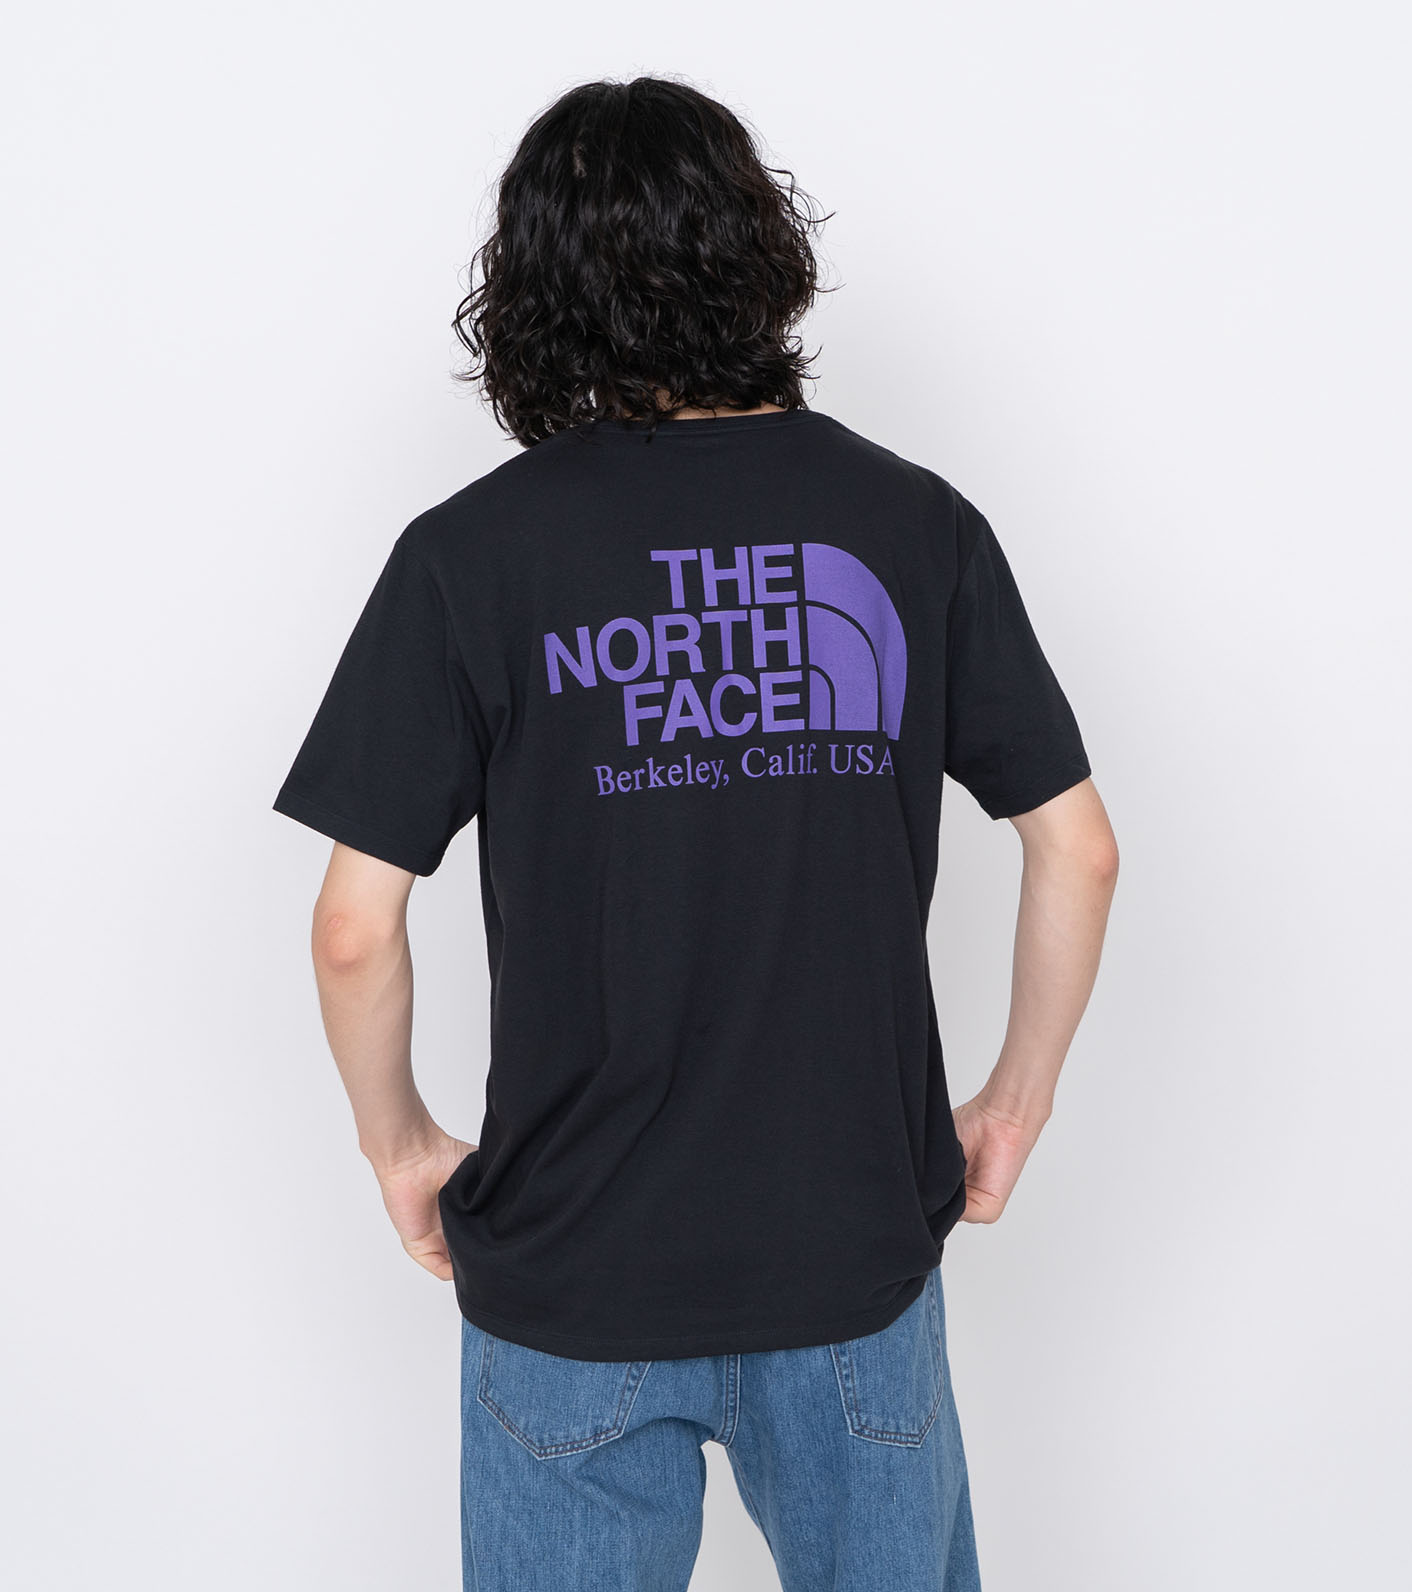 THE NORTH FACE PURPLE LABEL TEE